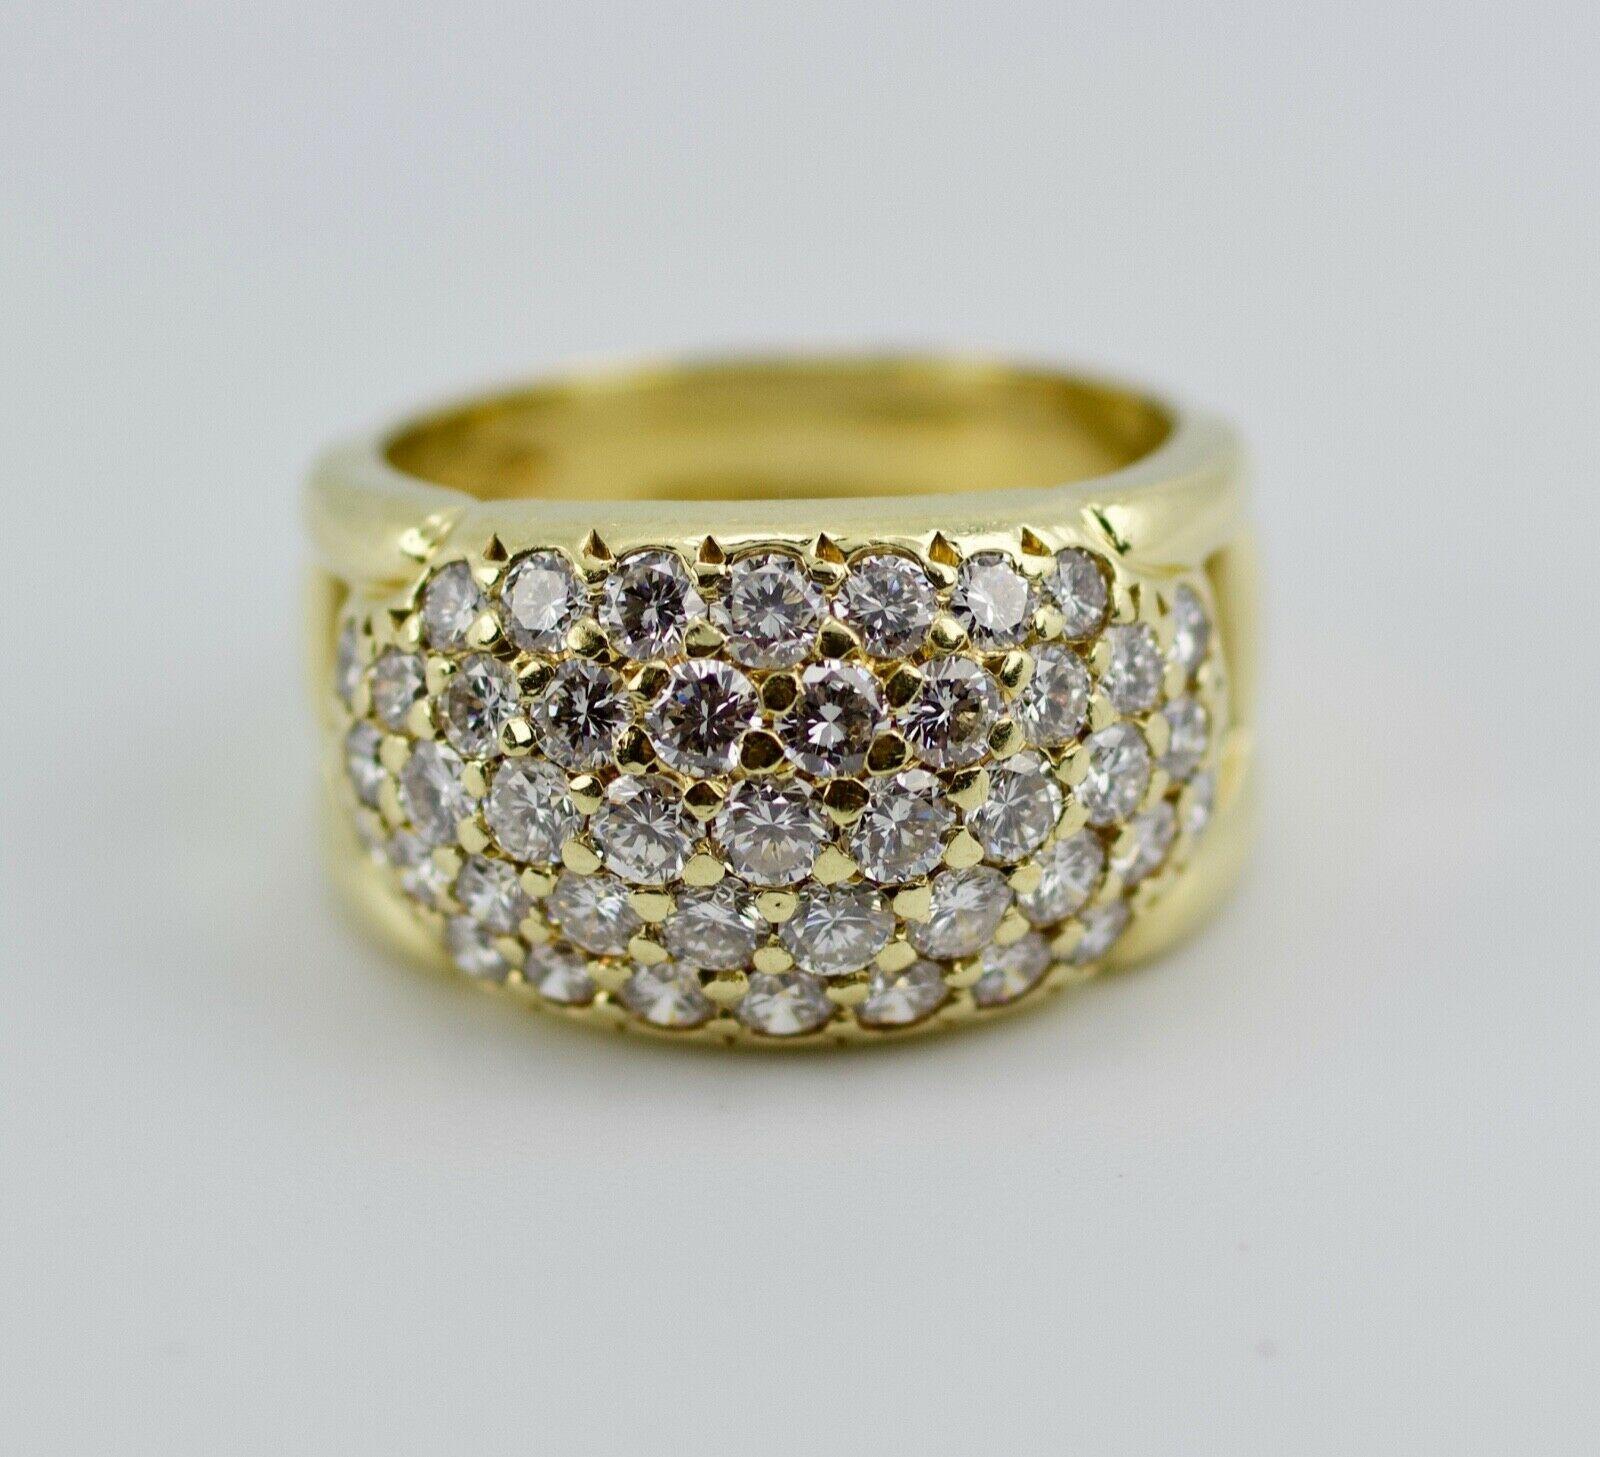 This is a stunning Herbert Rosenthal 18k yellow gold white round diamond  band. It is a size 6 and weighs in at 8.2 grams. These diamonds are white brilliant cut diamonds that add up to 1.50 carats total weight. They are D-E color and VS1-VS2